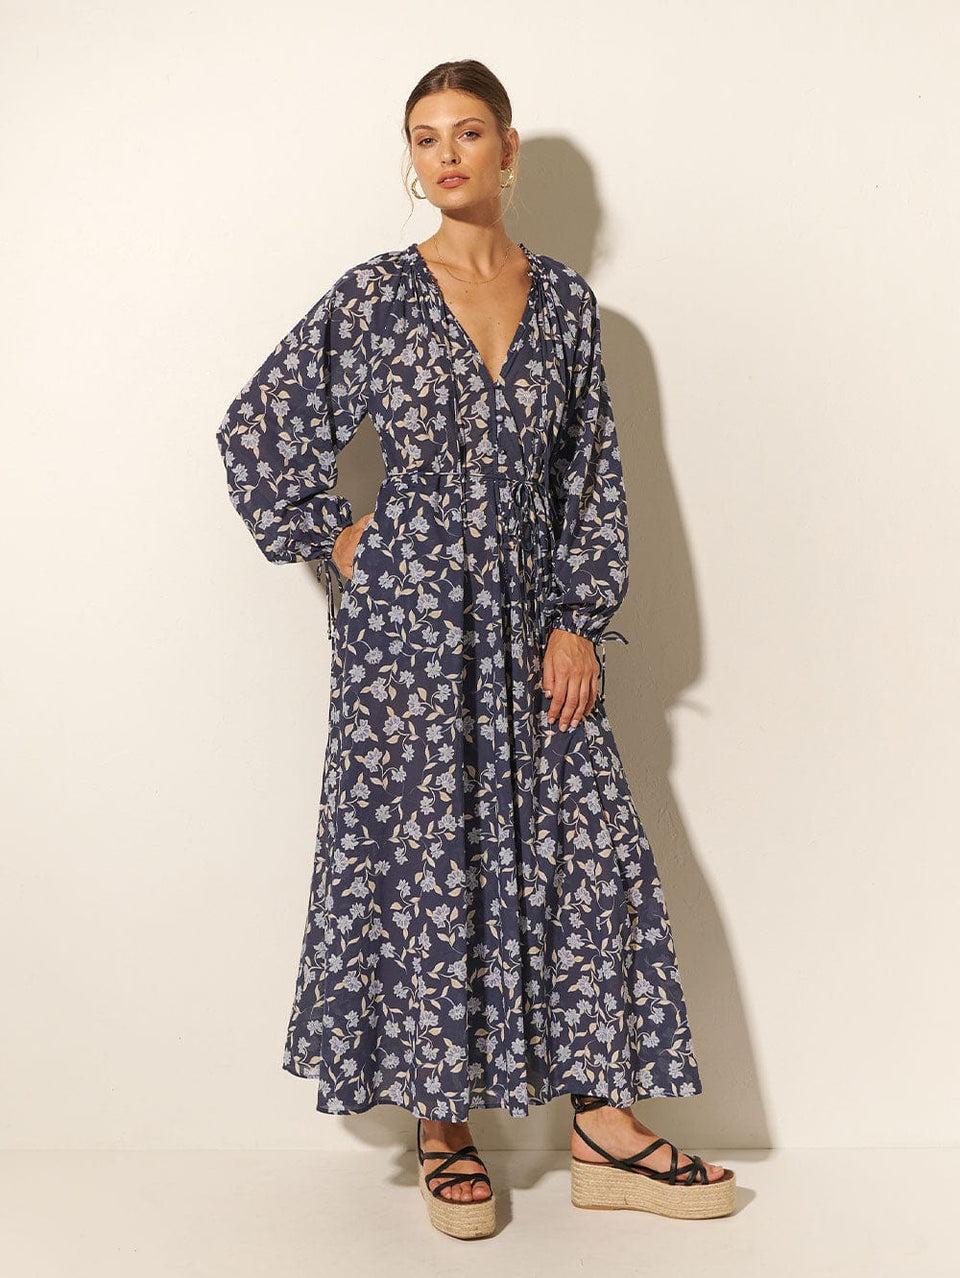 Studio model wears KIVARI Jeanne Maxi Dress: A navy and sky blue floral dress made from cotton and featuring a button front, waist tie, full-length blouson sleeves and frill collar detail.